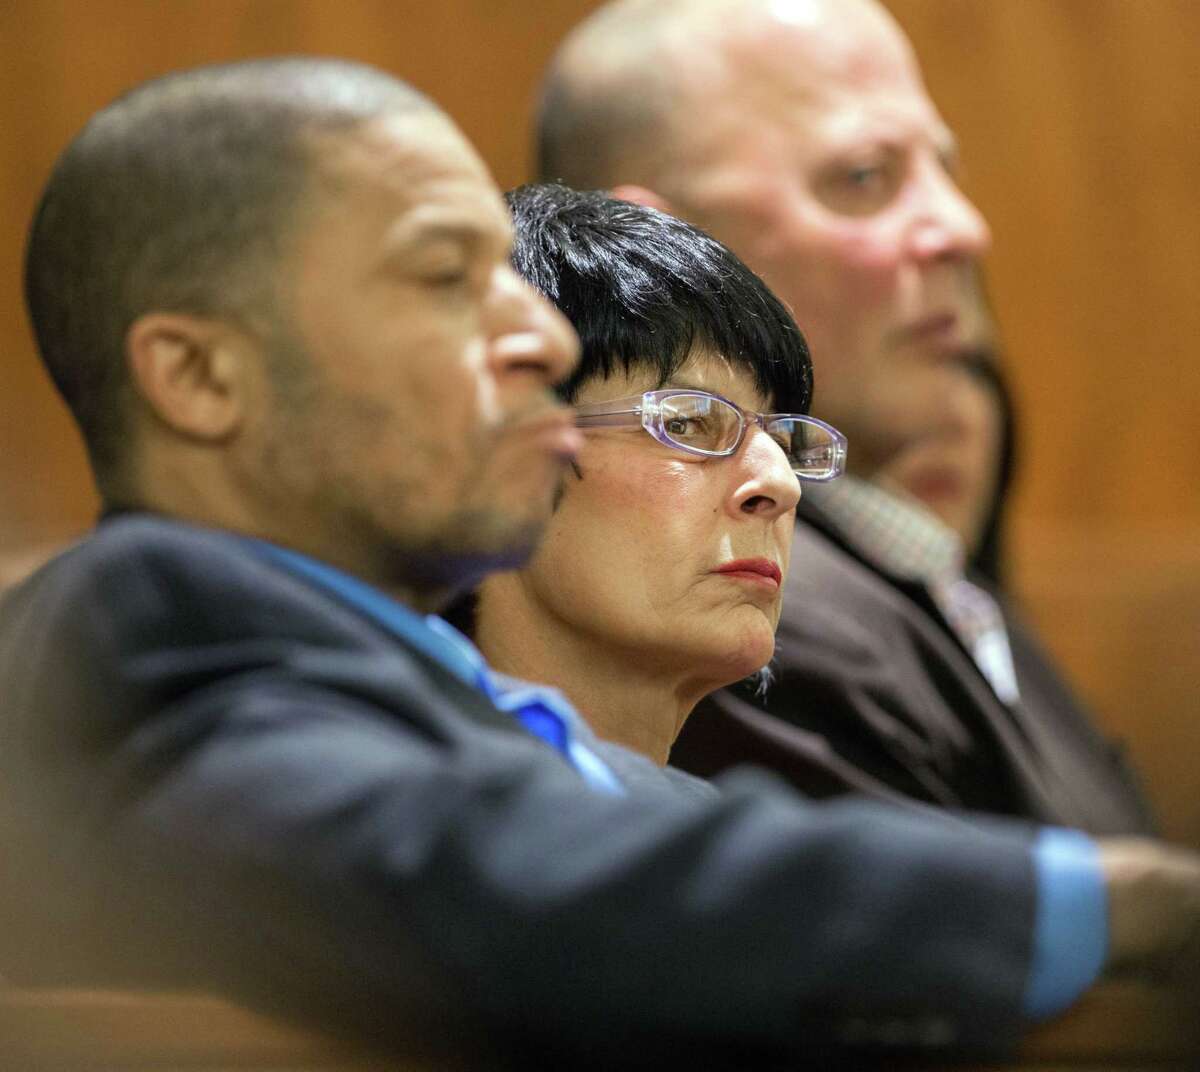 Terri Hernandez, right, listens during the trial of her son, former New England Patriot Aaron Hernandez, on Tuesday in Fall River, Mass.